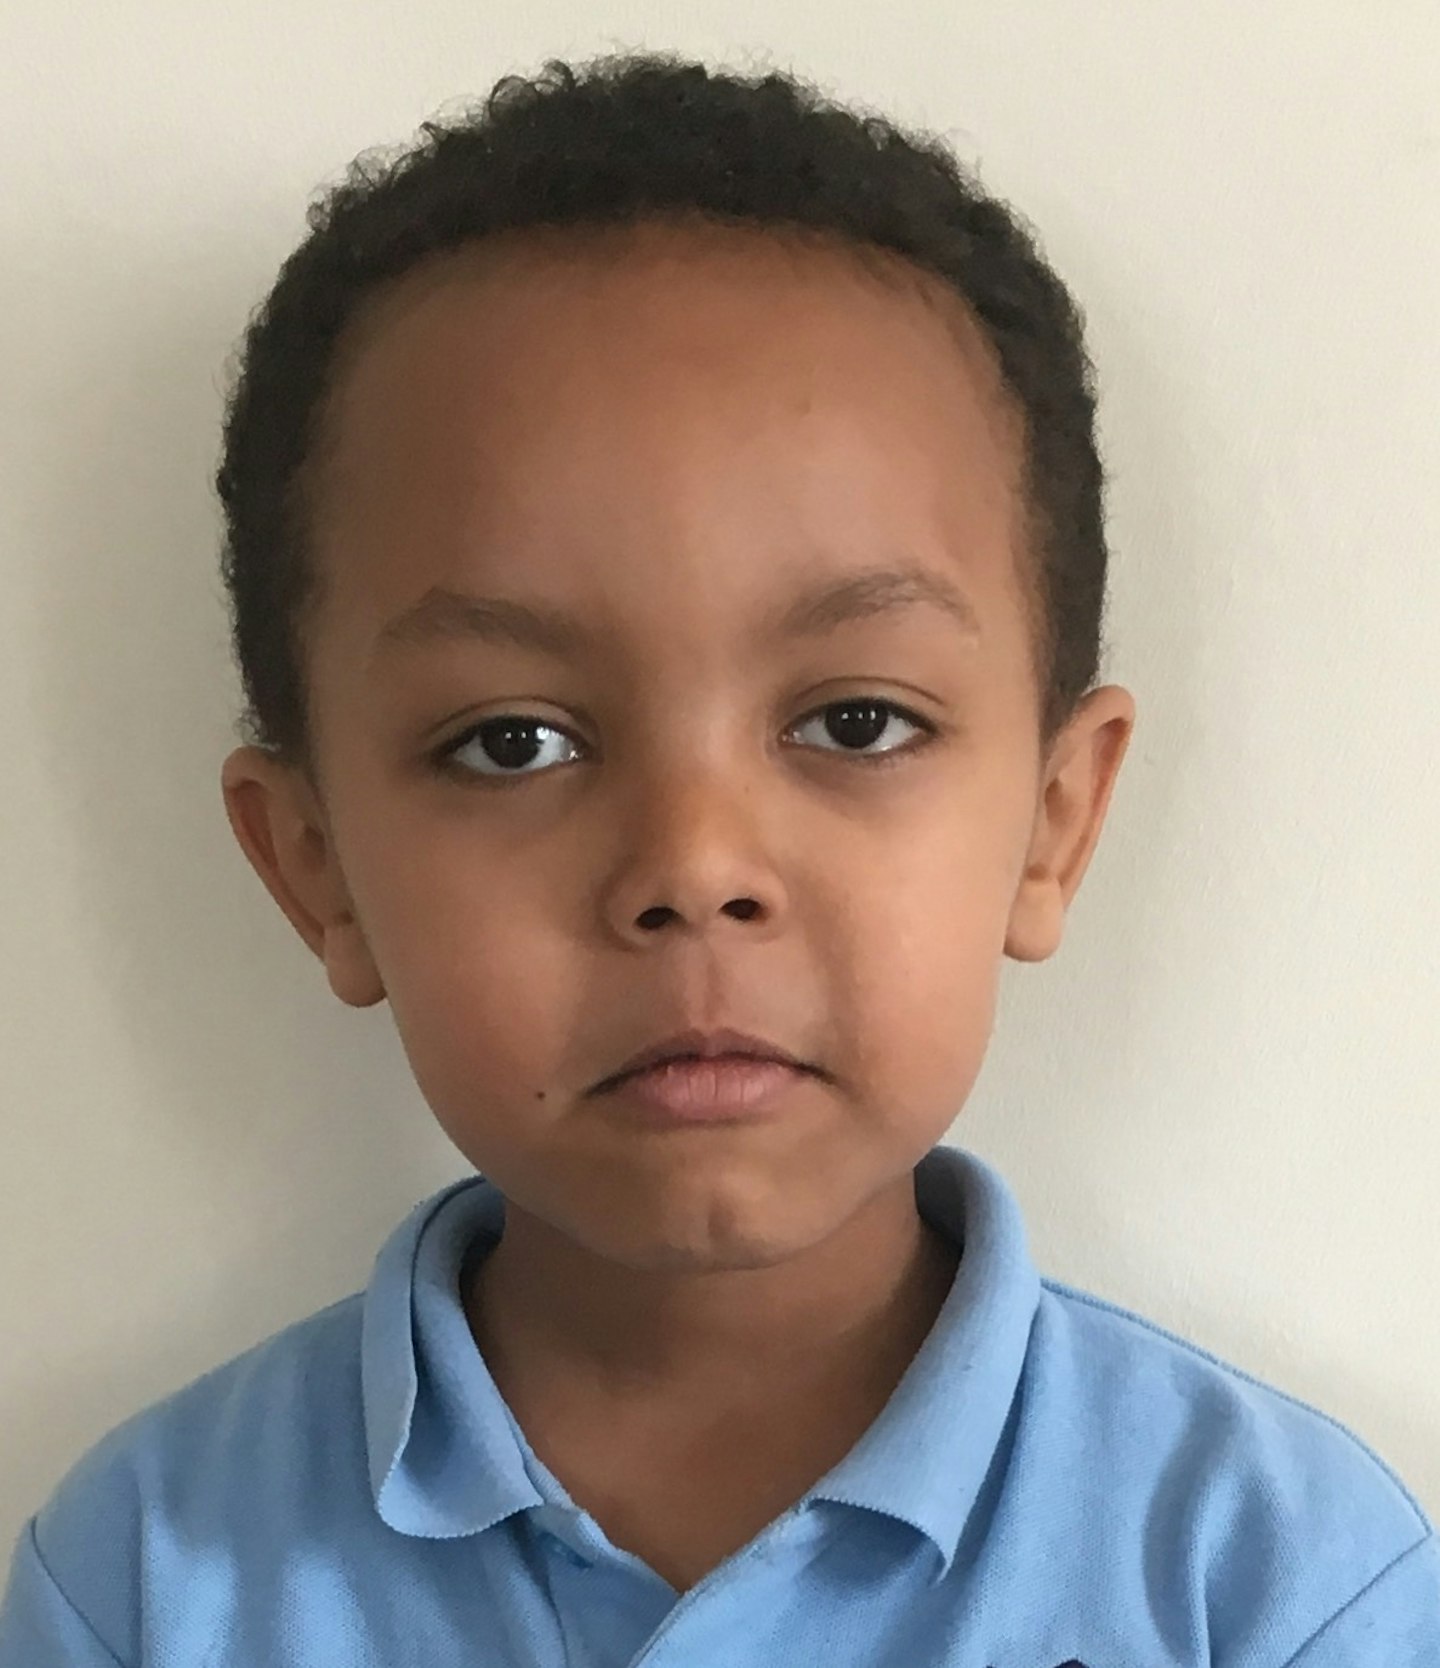 child-victim-grenfell-tower-fire-named-identify-isaac-paulous